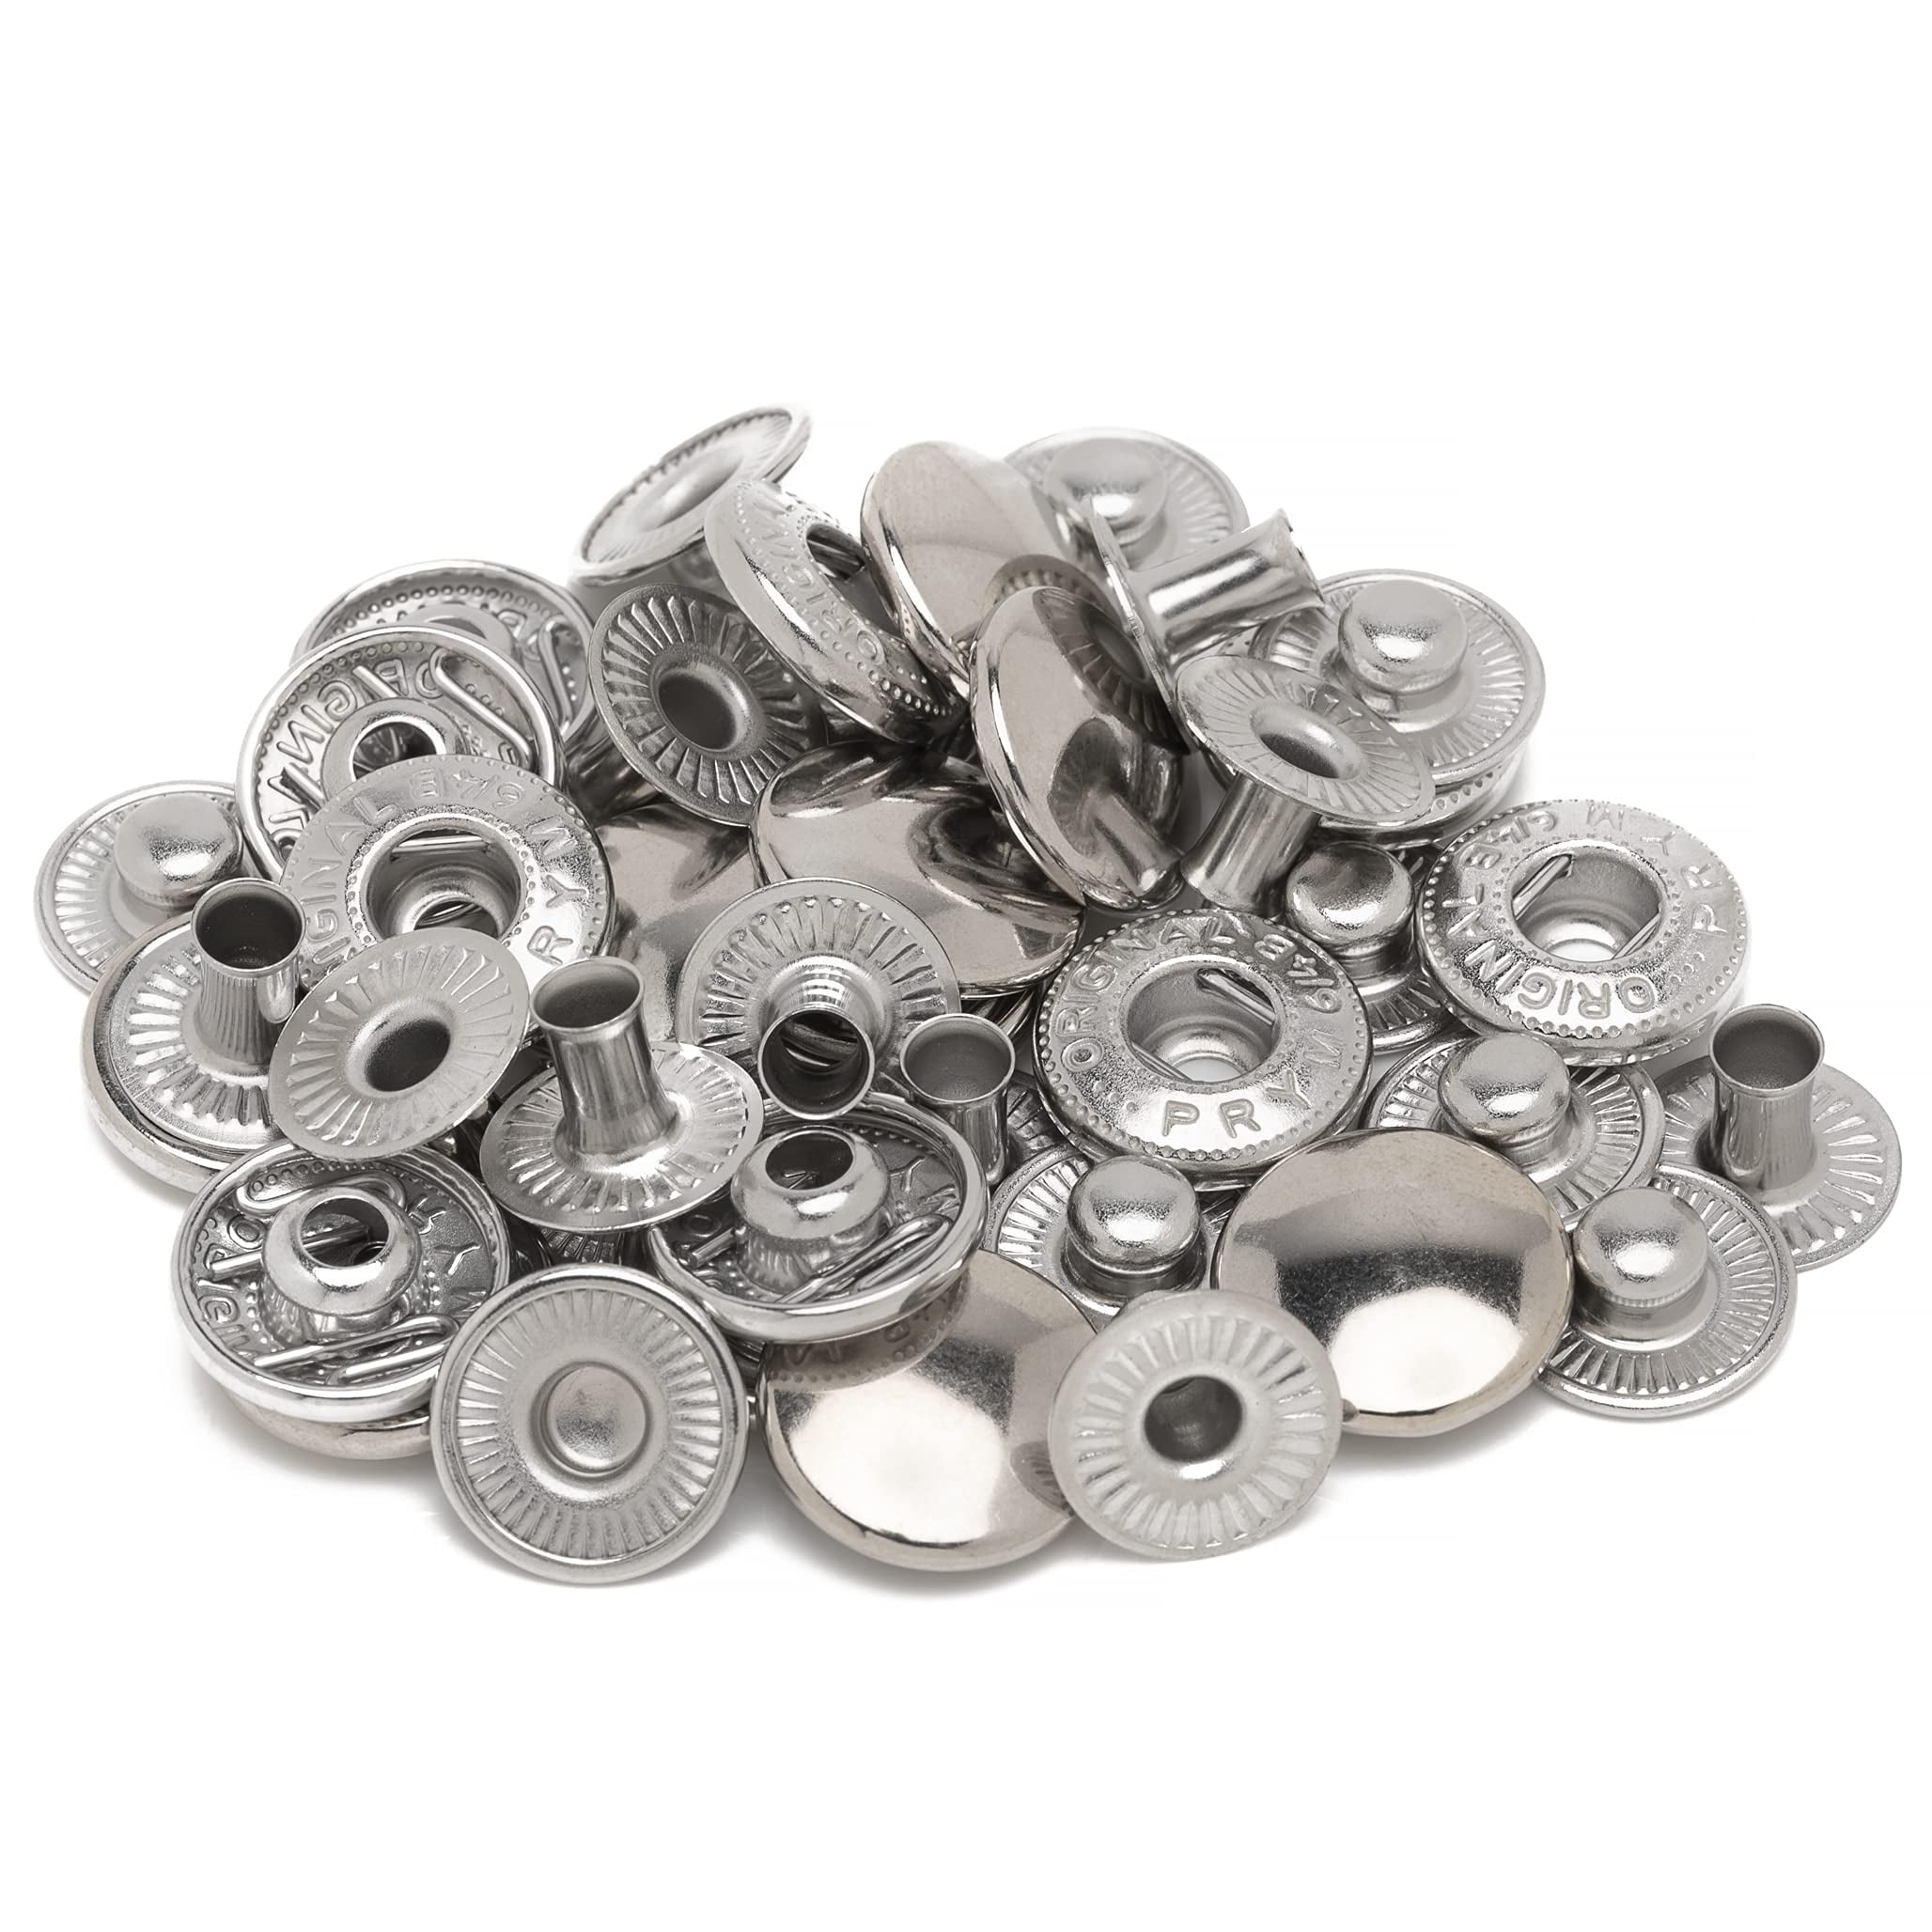 A brief History of the Snap Fastener